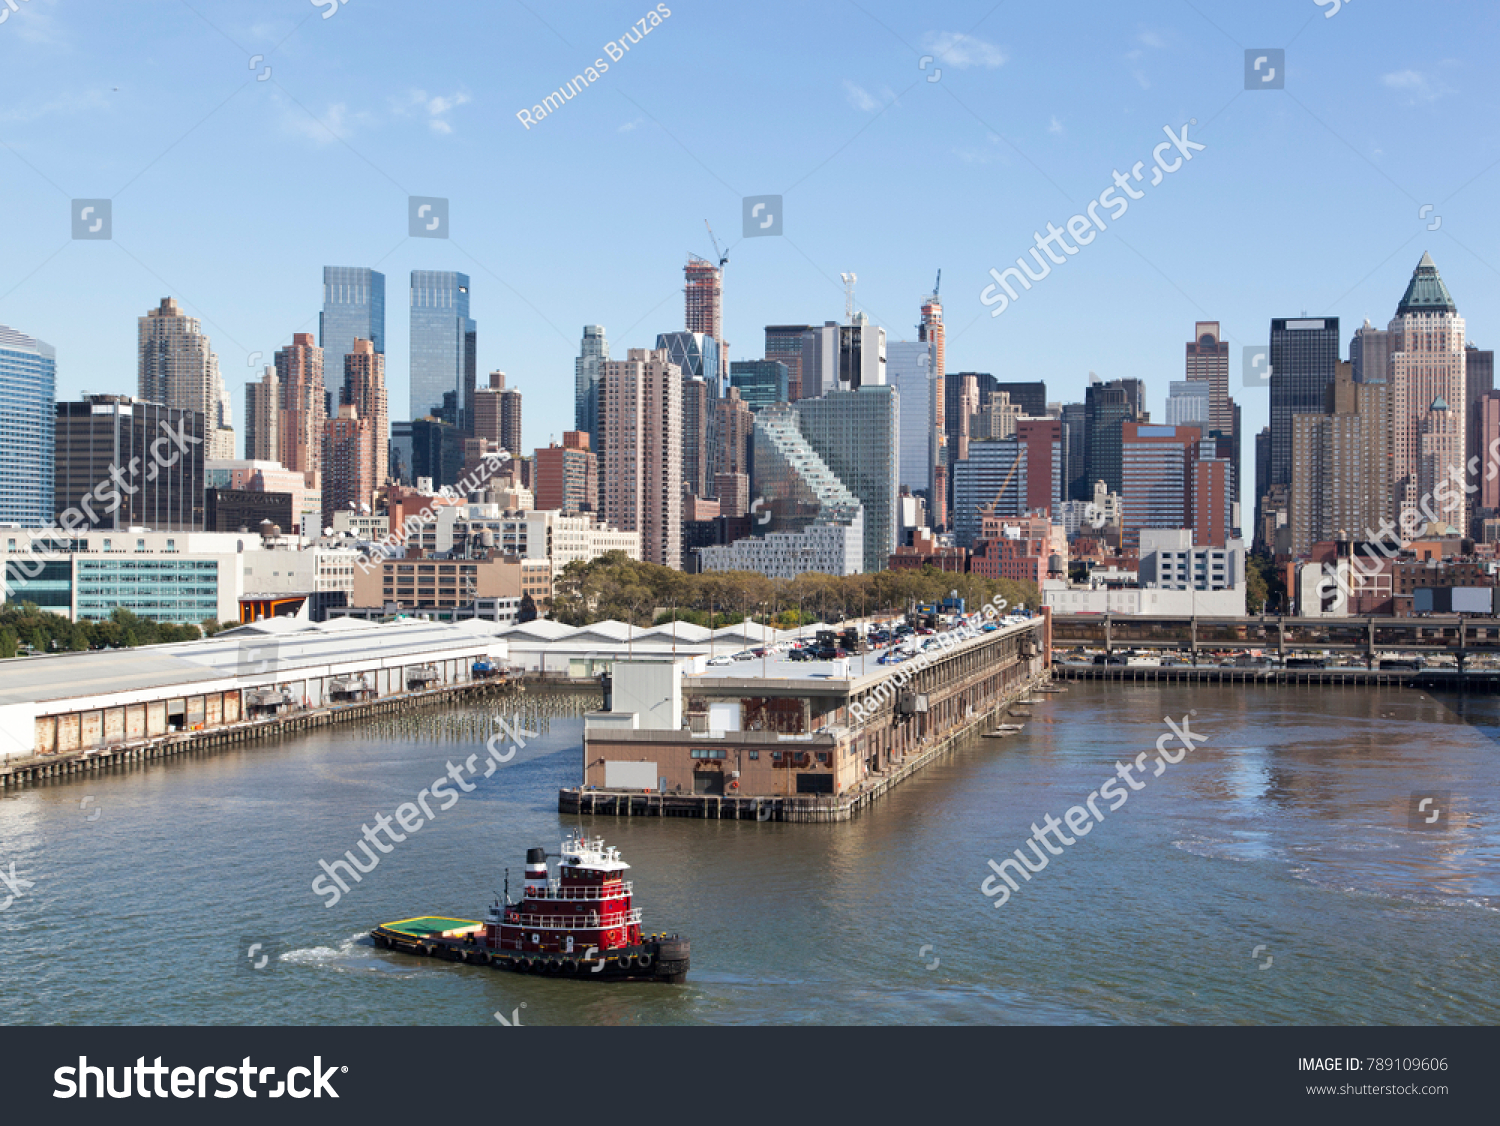 The tugboat passing by Manhattan Midtown piers (New York City). #789109606